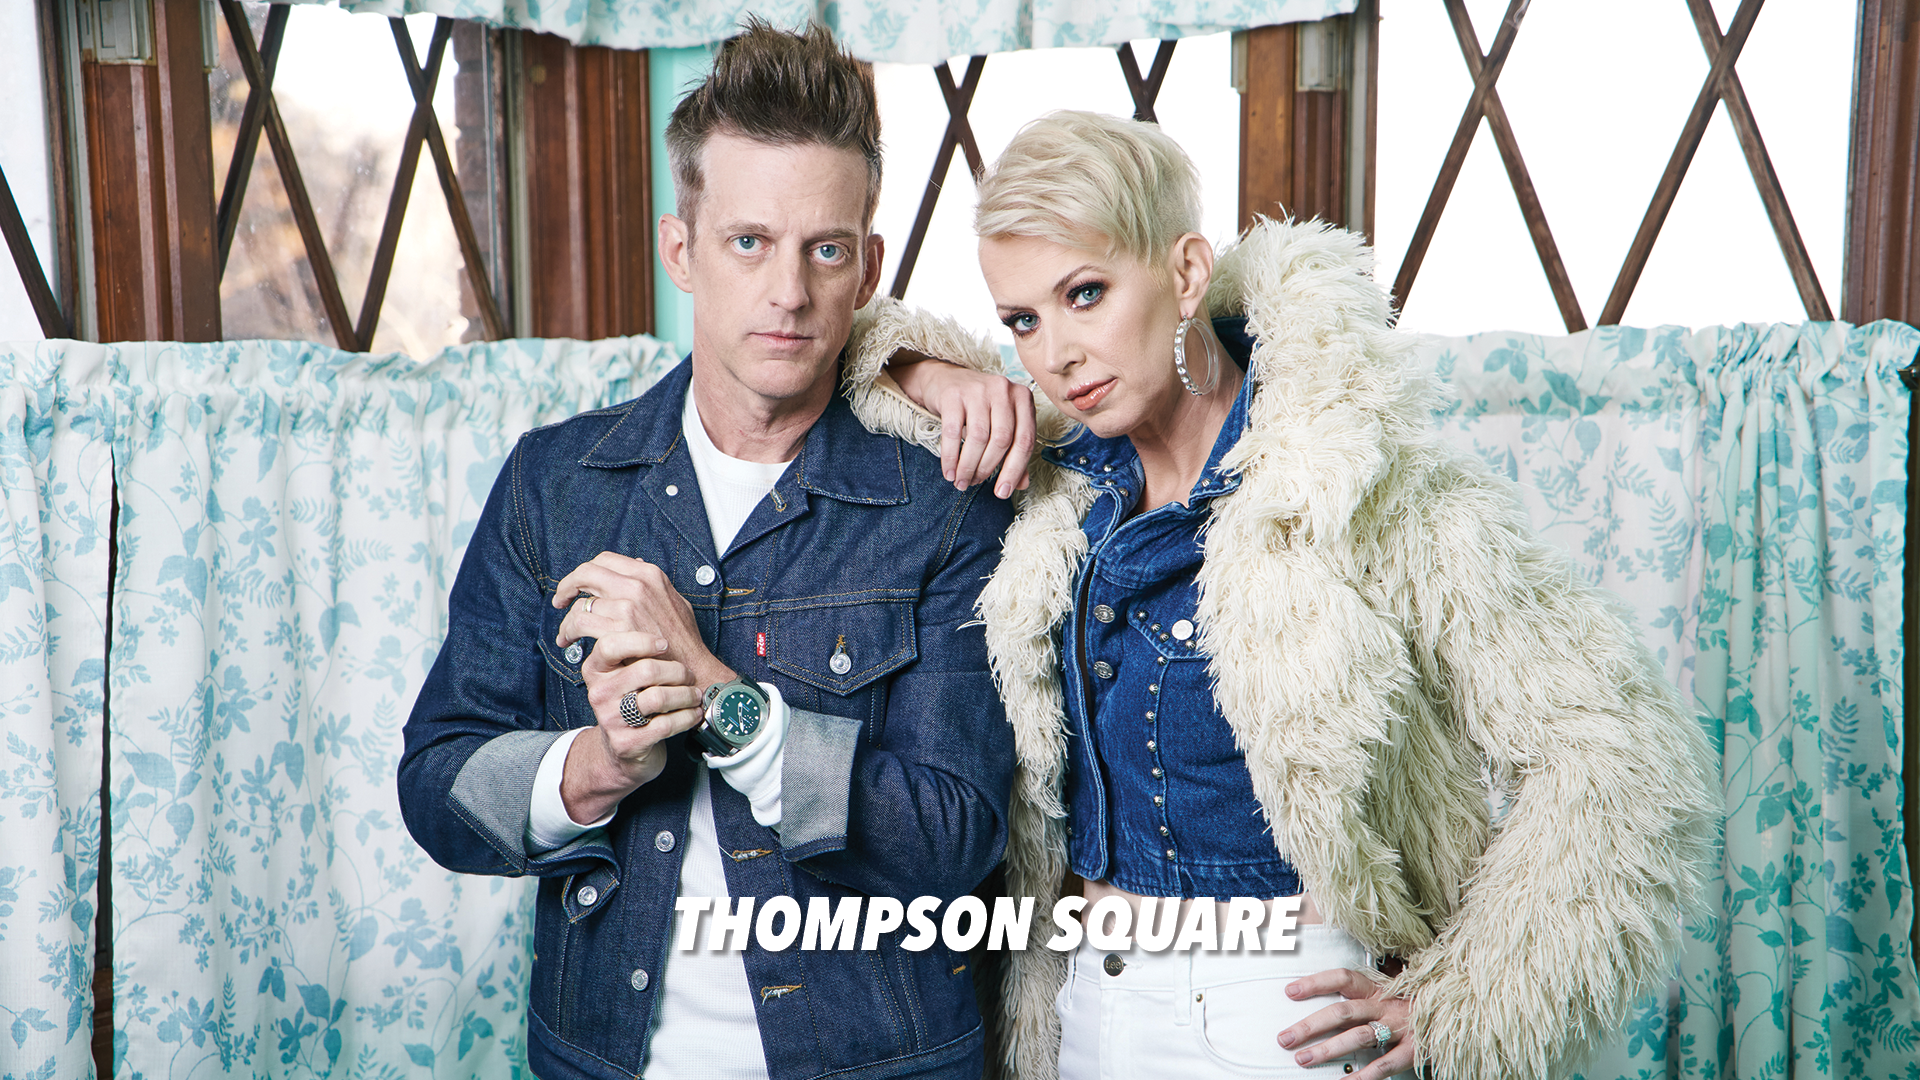 Thompson Square for Key West Songwriters Festival